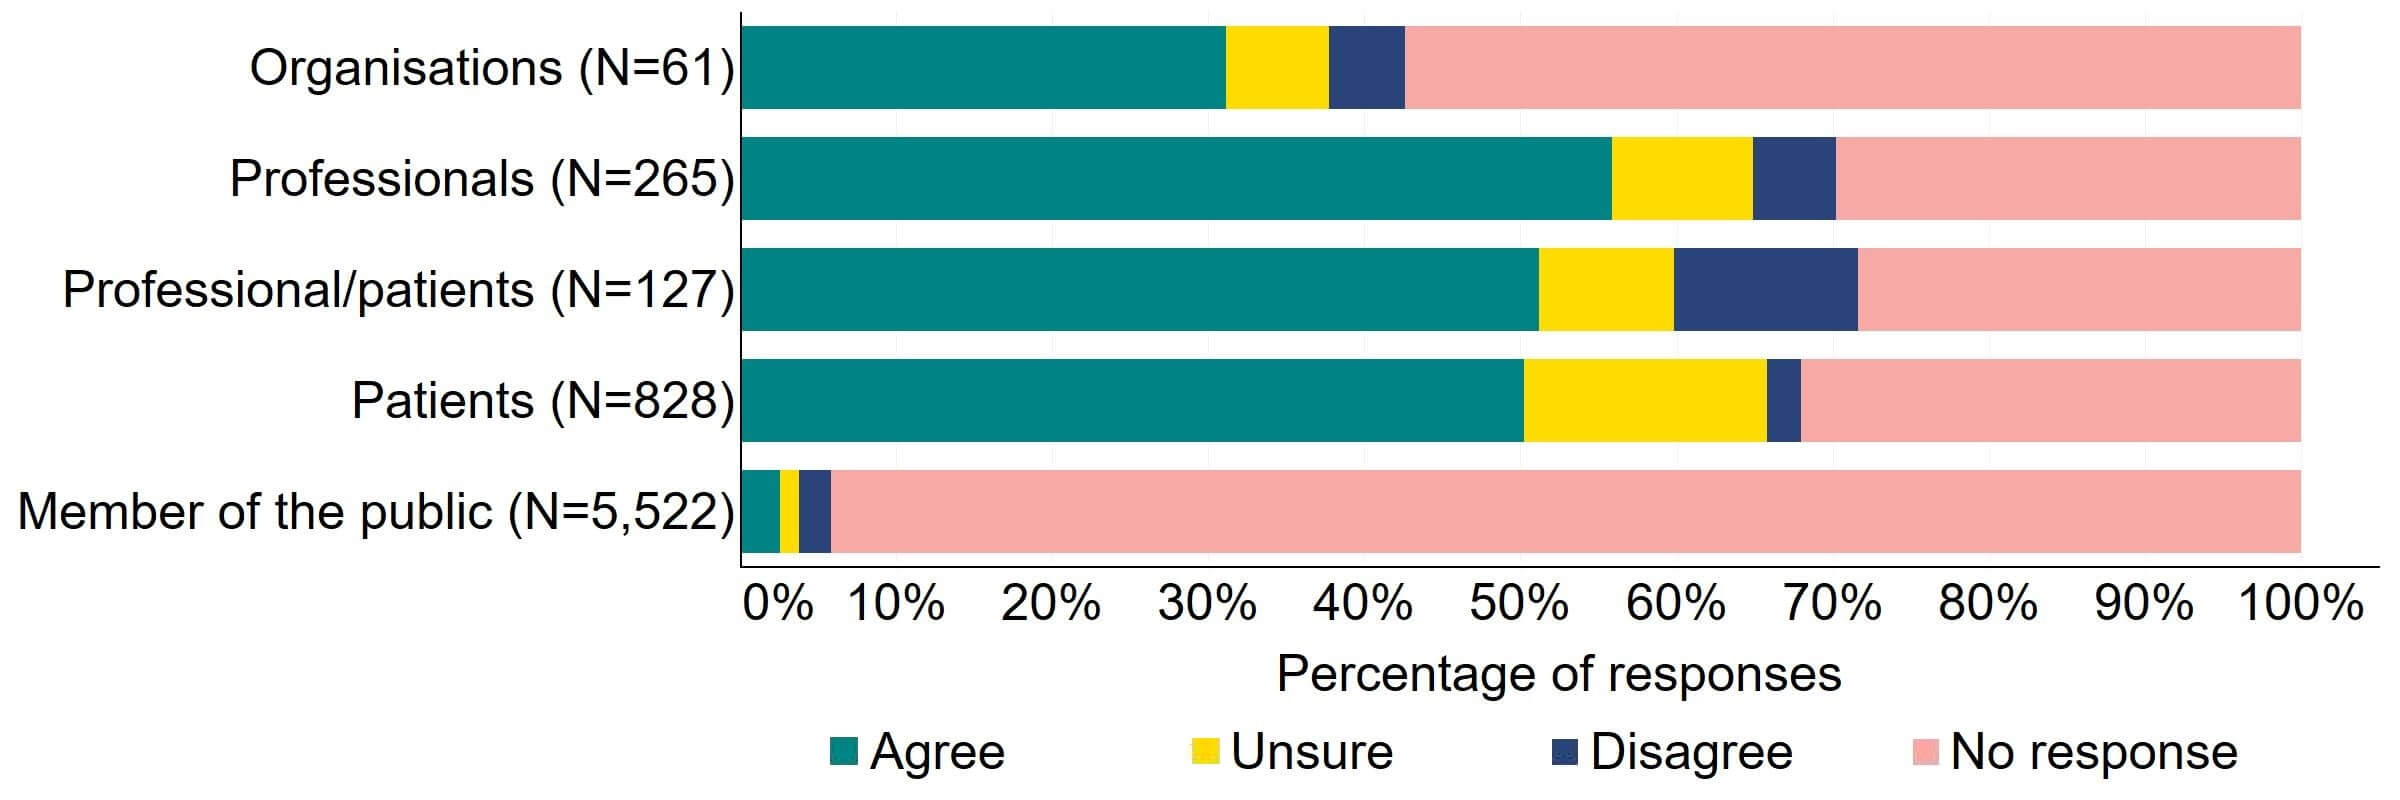 Figure 7 is a stacked bar chart showing the proportion of respondents in each response group who agreed, disagreed, were unsure, or who did not provide a response to the proposal. The underlying data can be downloaded as an Excel worksheet at the top of the page.